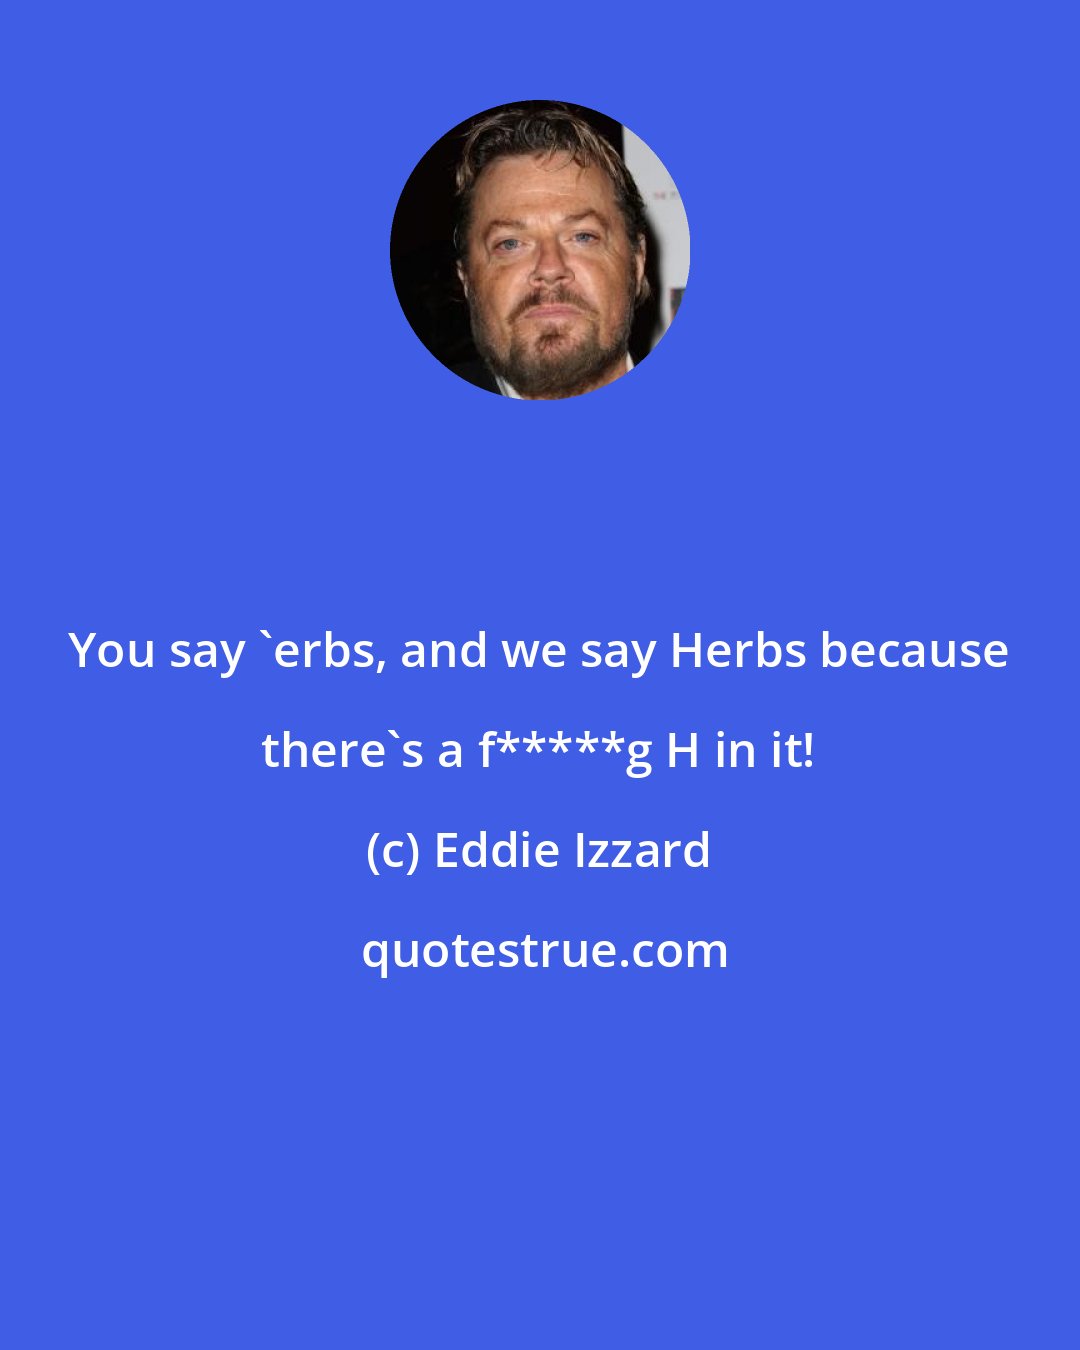 Eddie Izzard: You say 'erbs, and we say Herbs because there's a f*****g H in it!